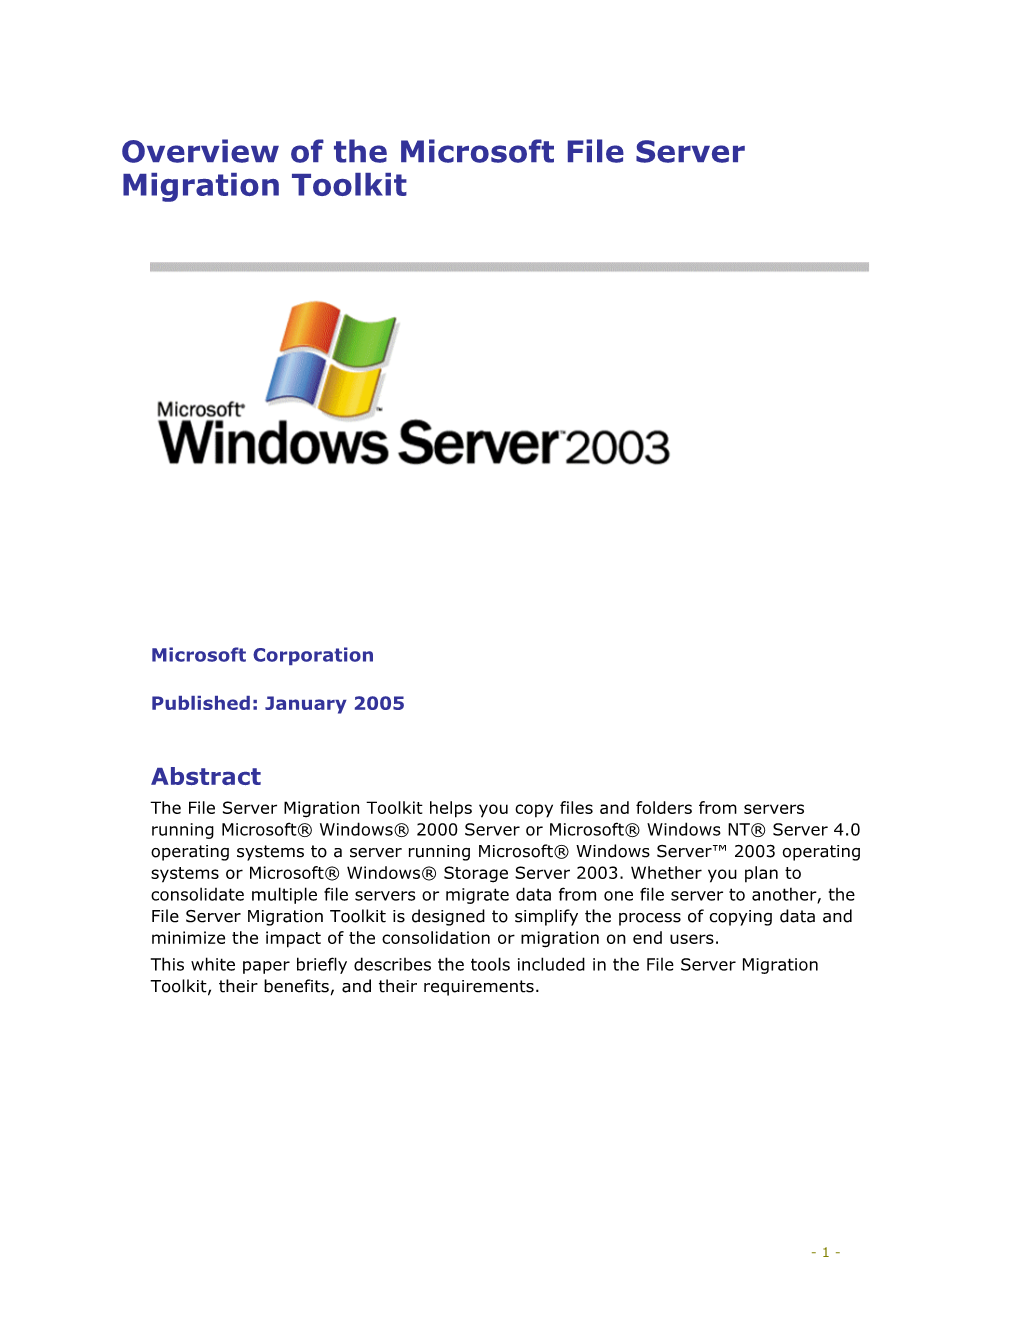 Overview of the Microsoft File Server Migration Toolkit